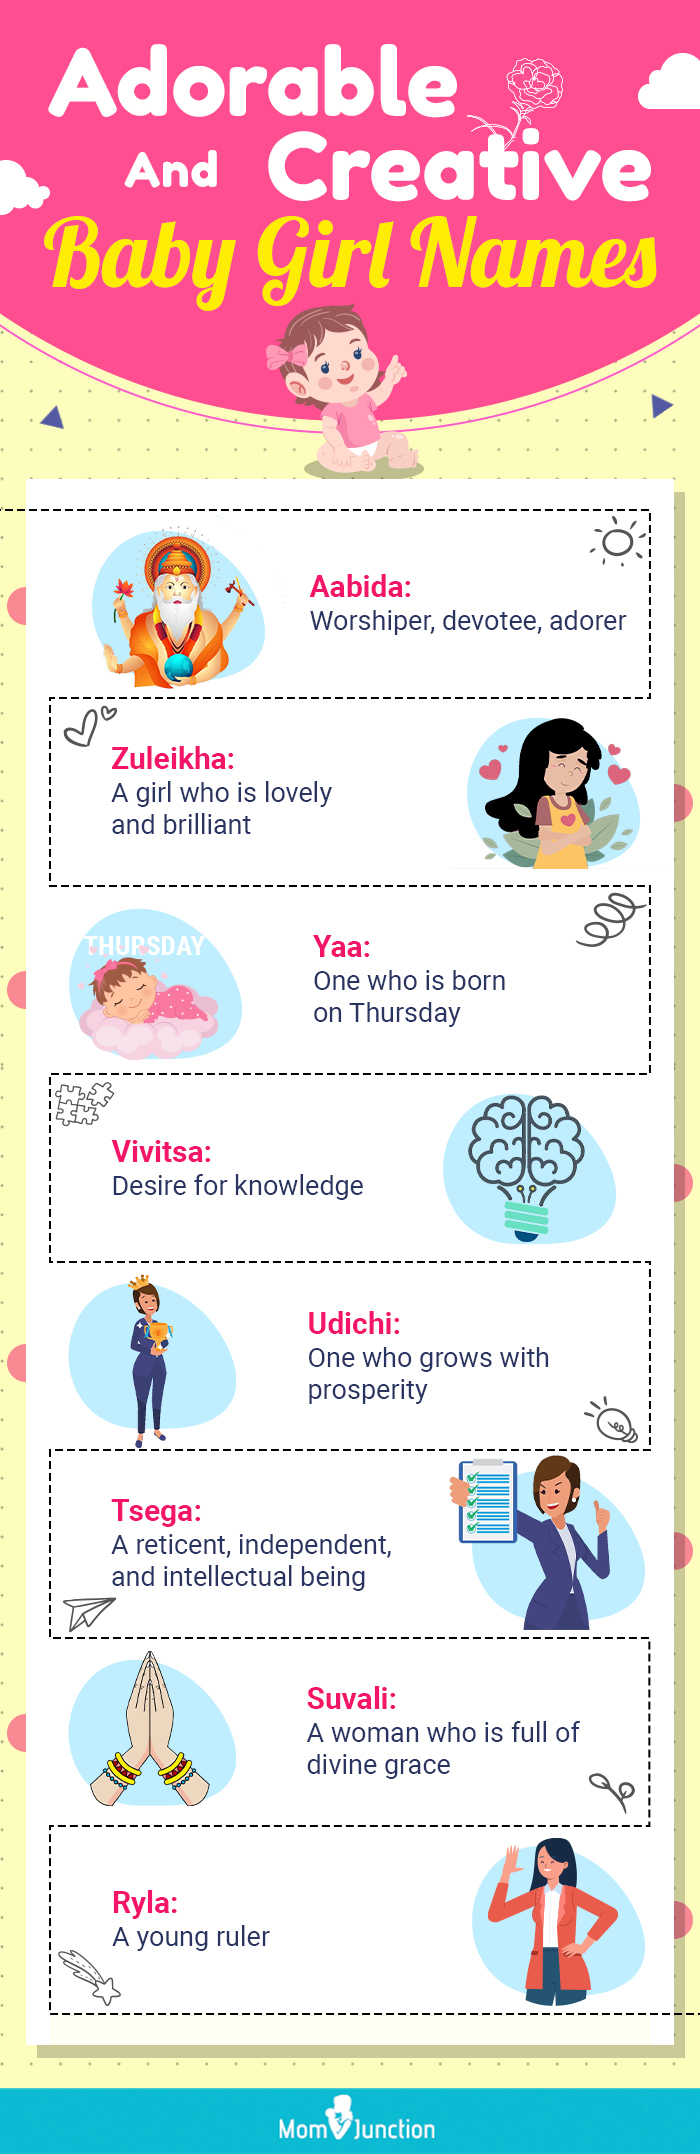 adorable and creative baby girl names (infographic)